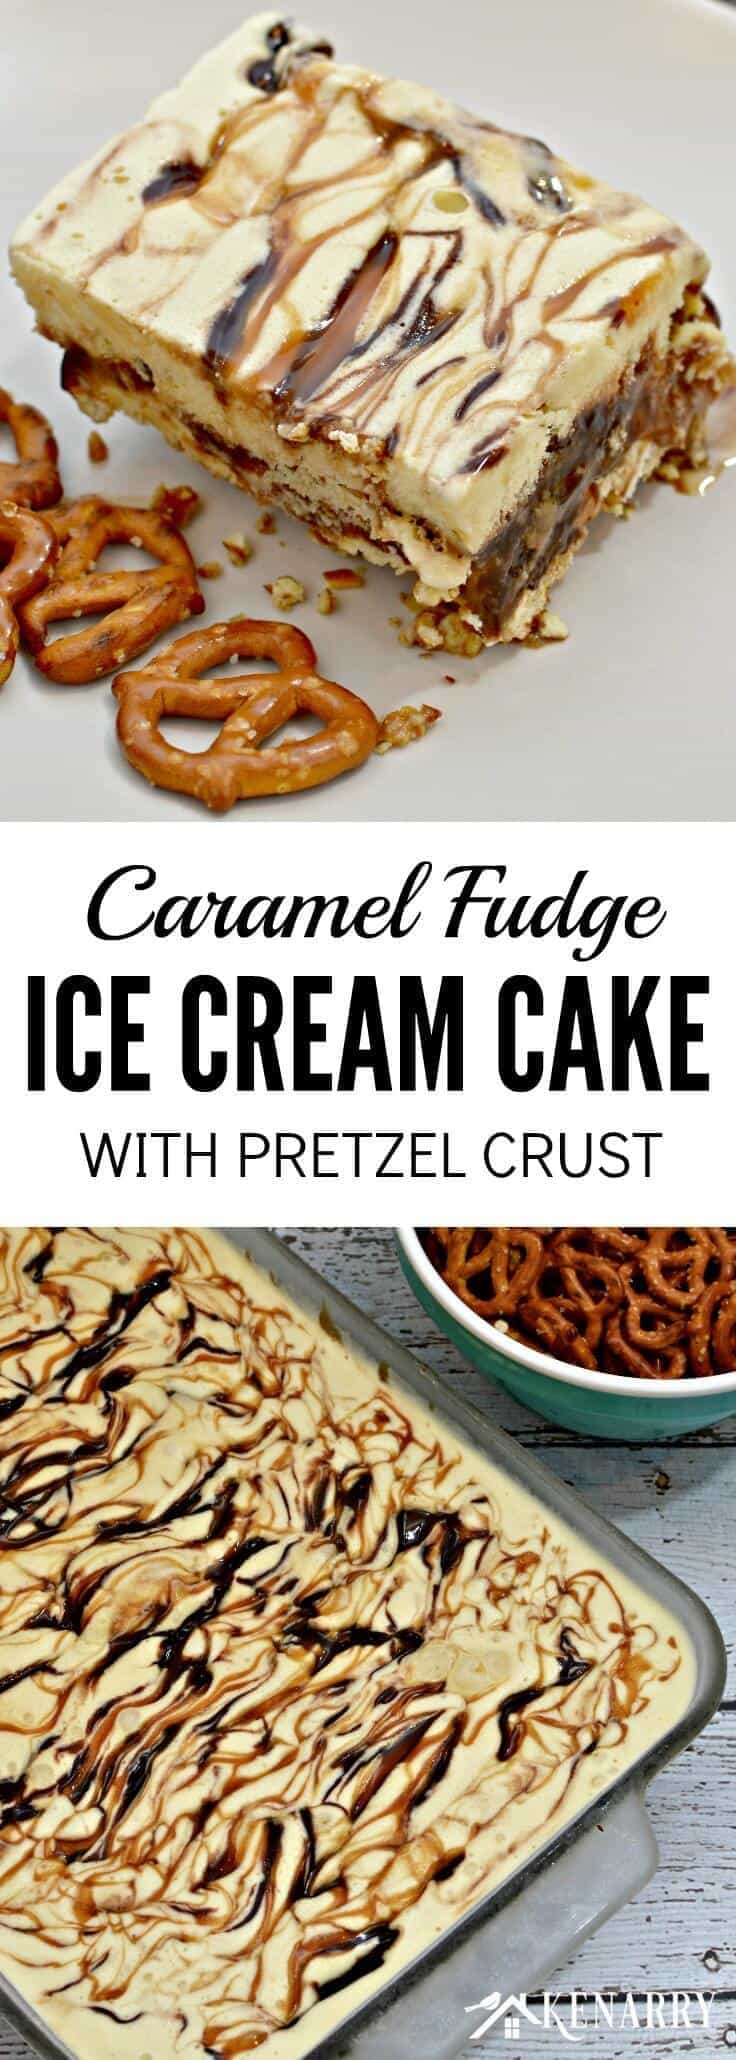 I can't wait to try this recipe idea for Caramel Fudge Ice Cream Cake with a pretzel crust! It looks like a delicious chocolate dessert for a hot summer day or a party with friends.